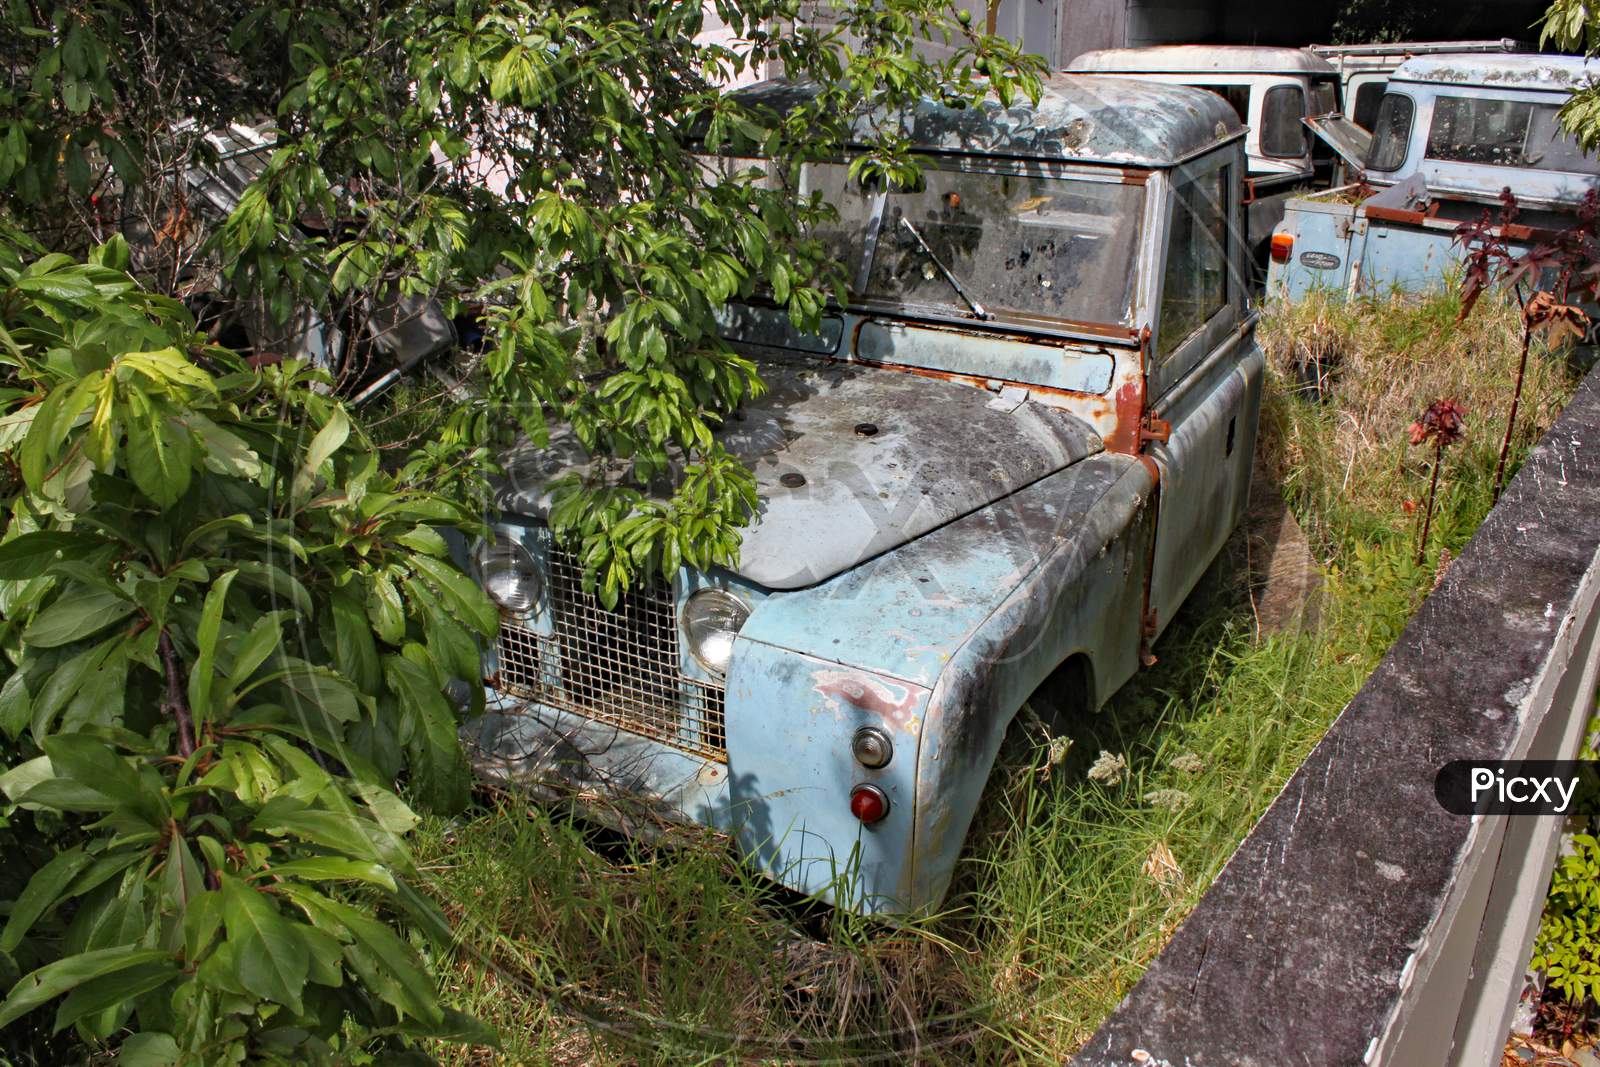 A Collection Of Old Rusty Land Rover Defenders In A Garden With Trees And Bushes Growing Around Them